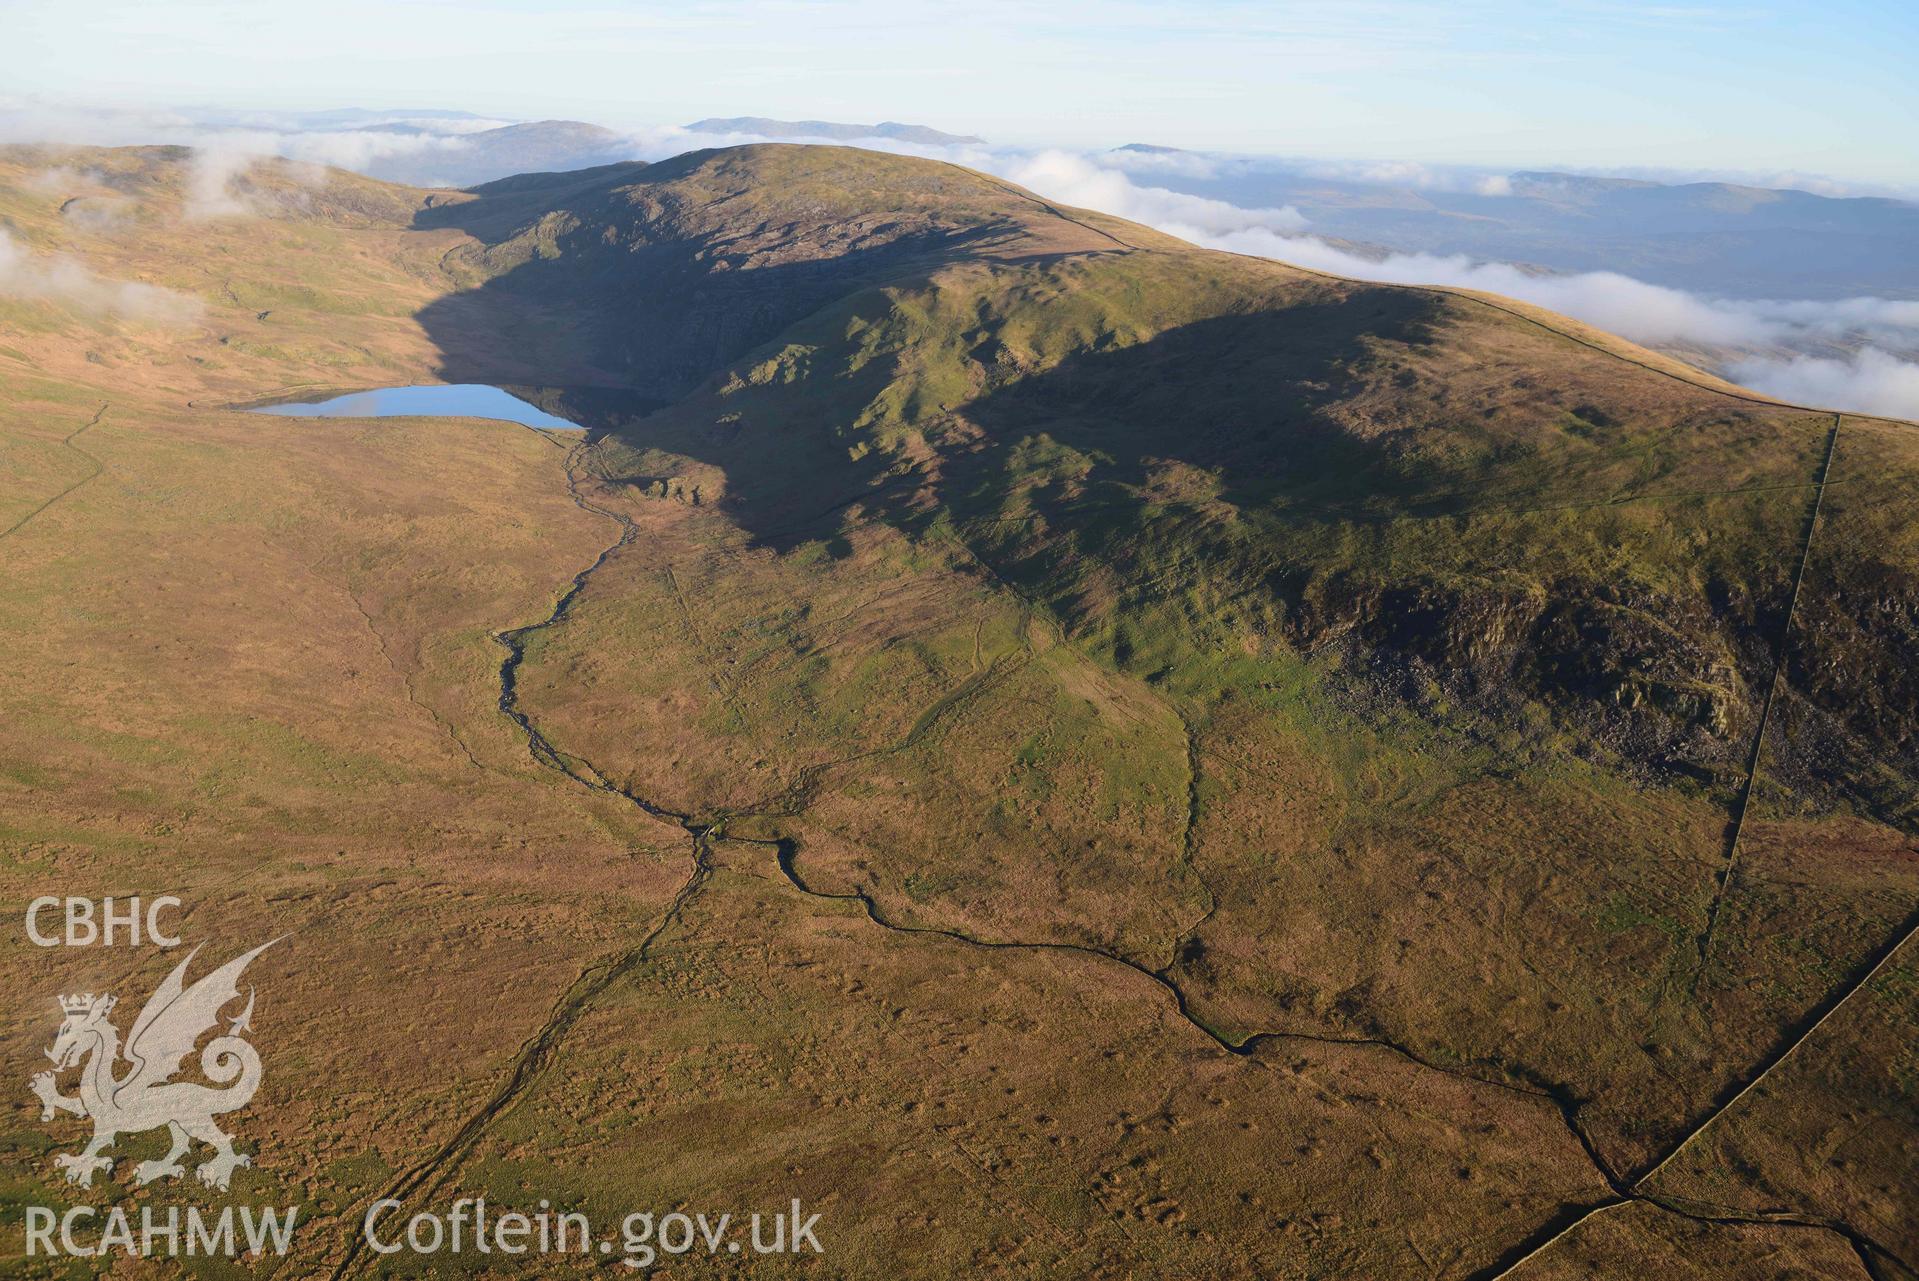 Oblique aerial photograph of Pont Scethin landscape taken from the south west during the Royal Commission’s programme of archaeological aerial reconnaissance by Toby Driver on 12th January 2022